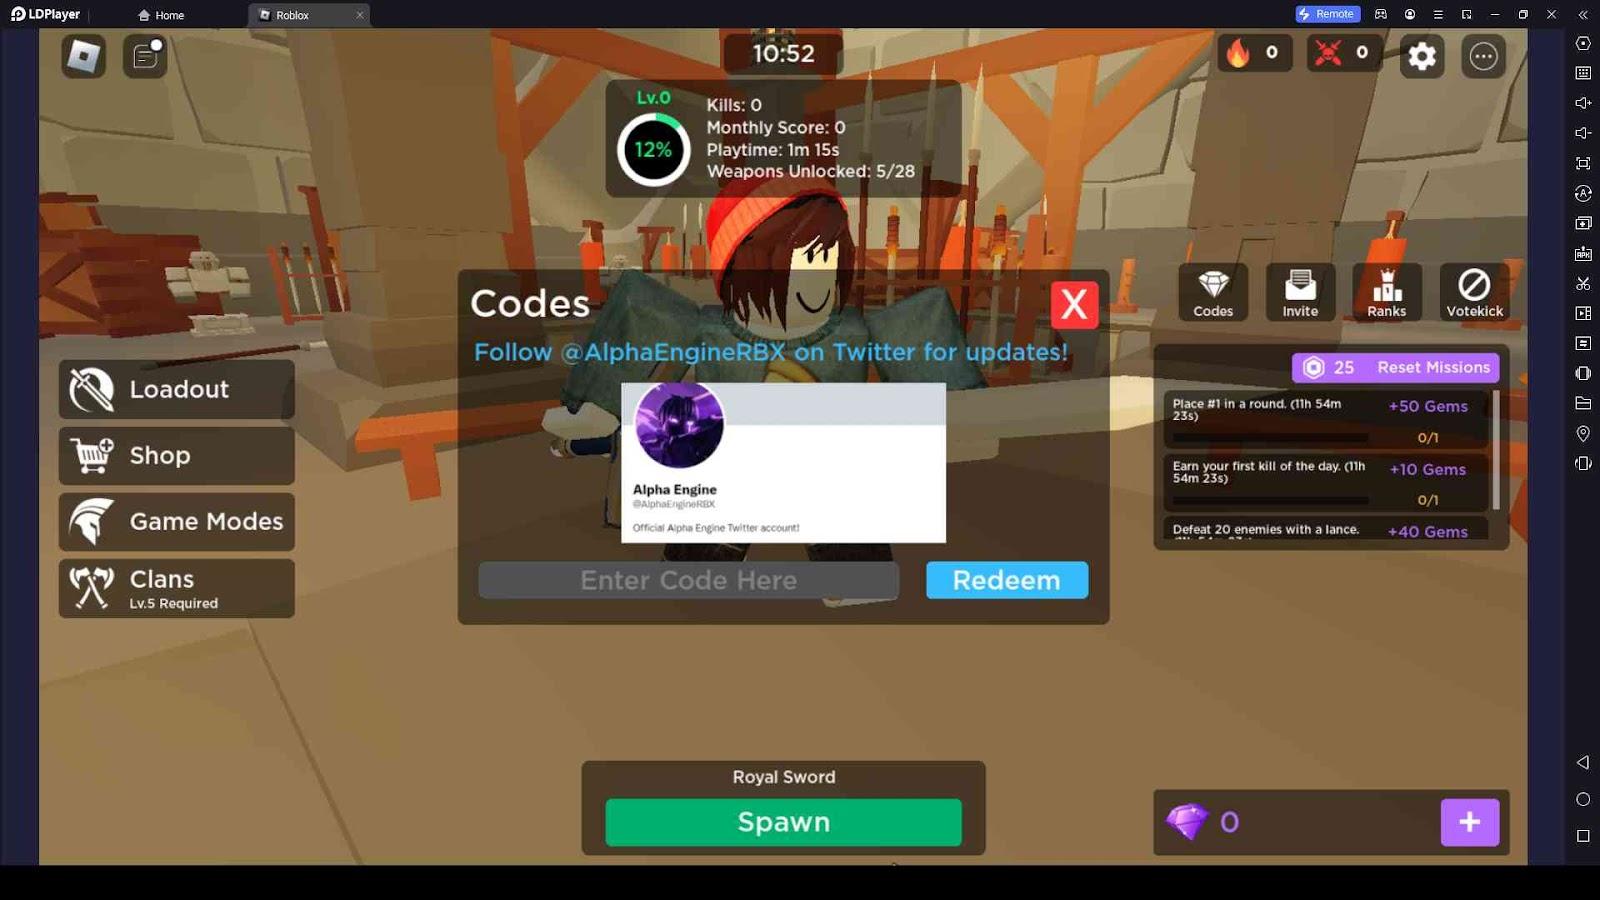 Roblox Undisputed Boxers Redeem Codes for Free Items, Materials